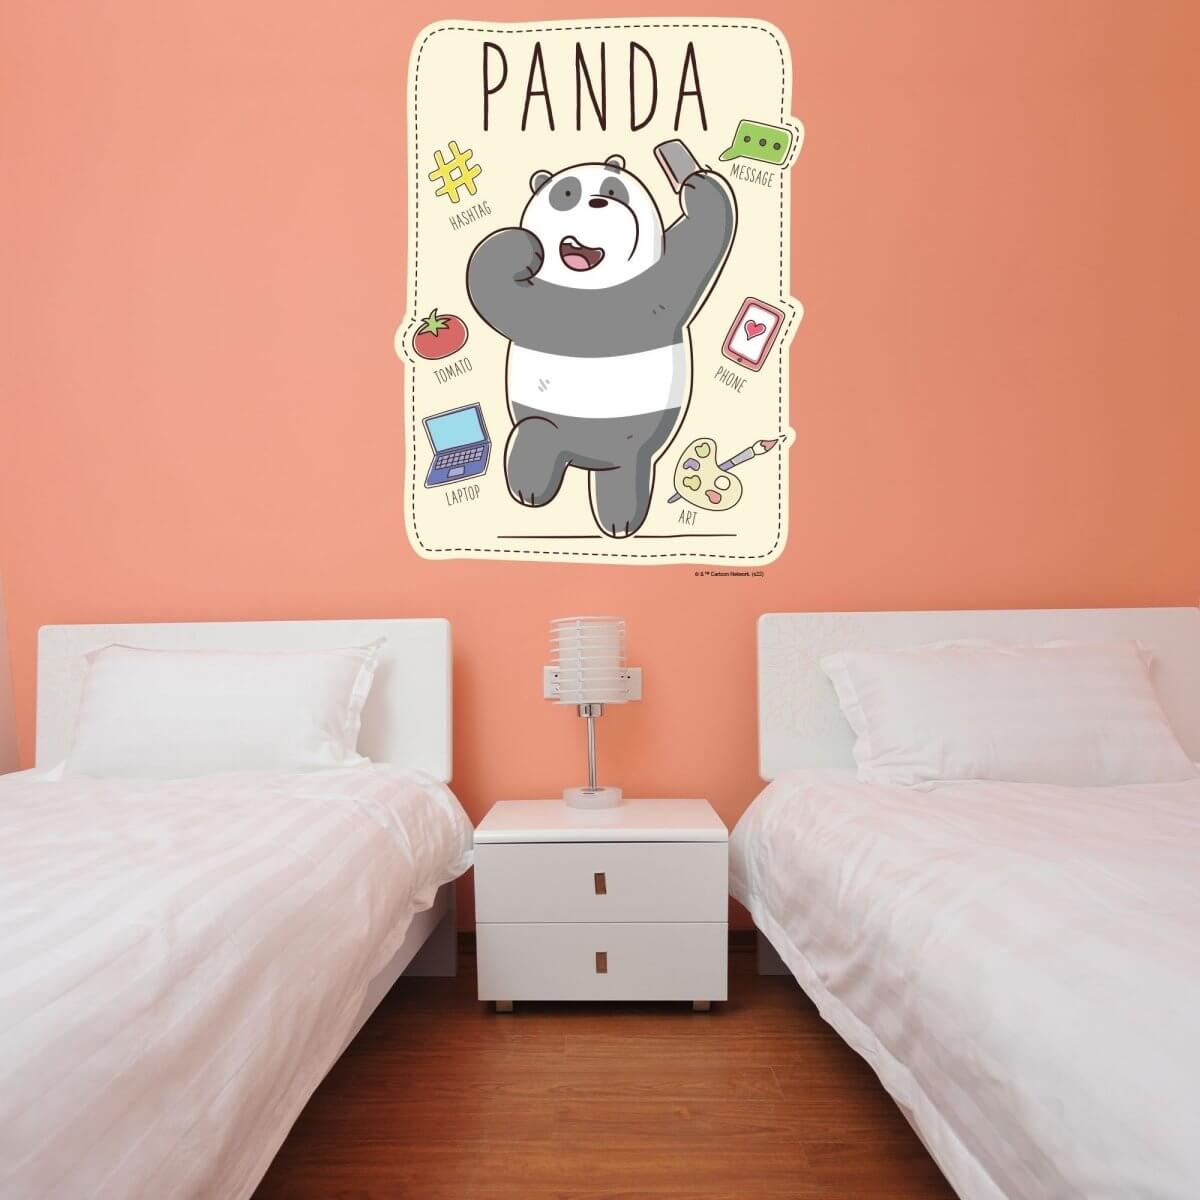 Kismet Decals Home & Room Decor We Bare Bears Panda's Favorites Wall decal sticker - officially licensed - latex printed with no solvent odor - Kismet Decals